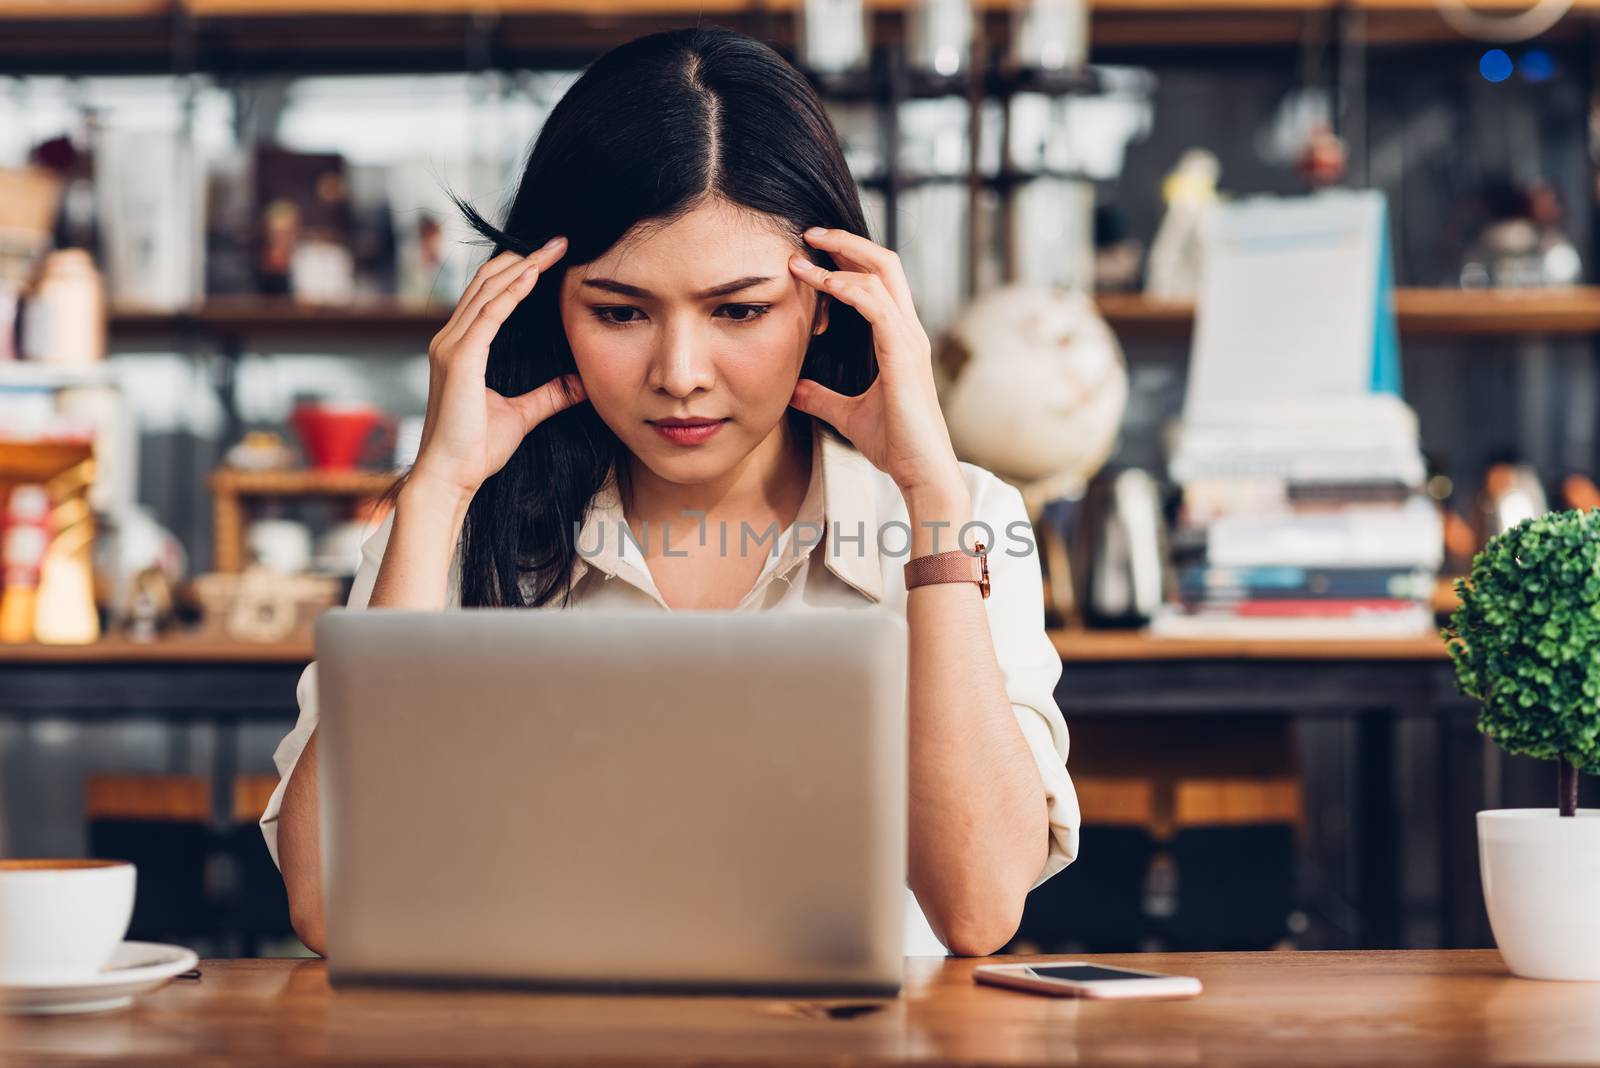 Freelance business woman working with laptop computer he was stressed out with job failing bankruptcy in coffee shop